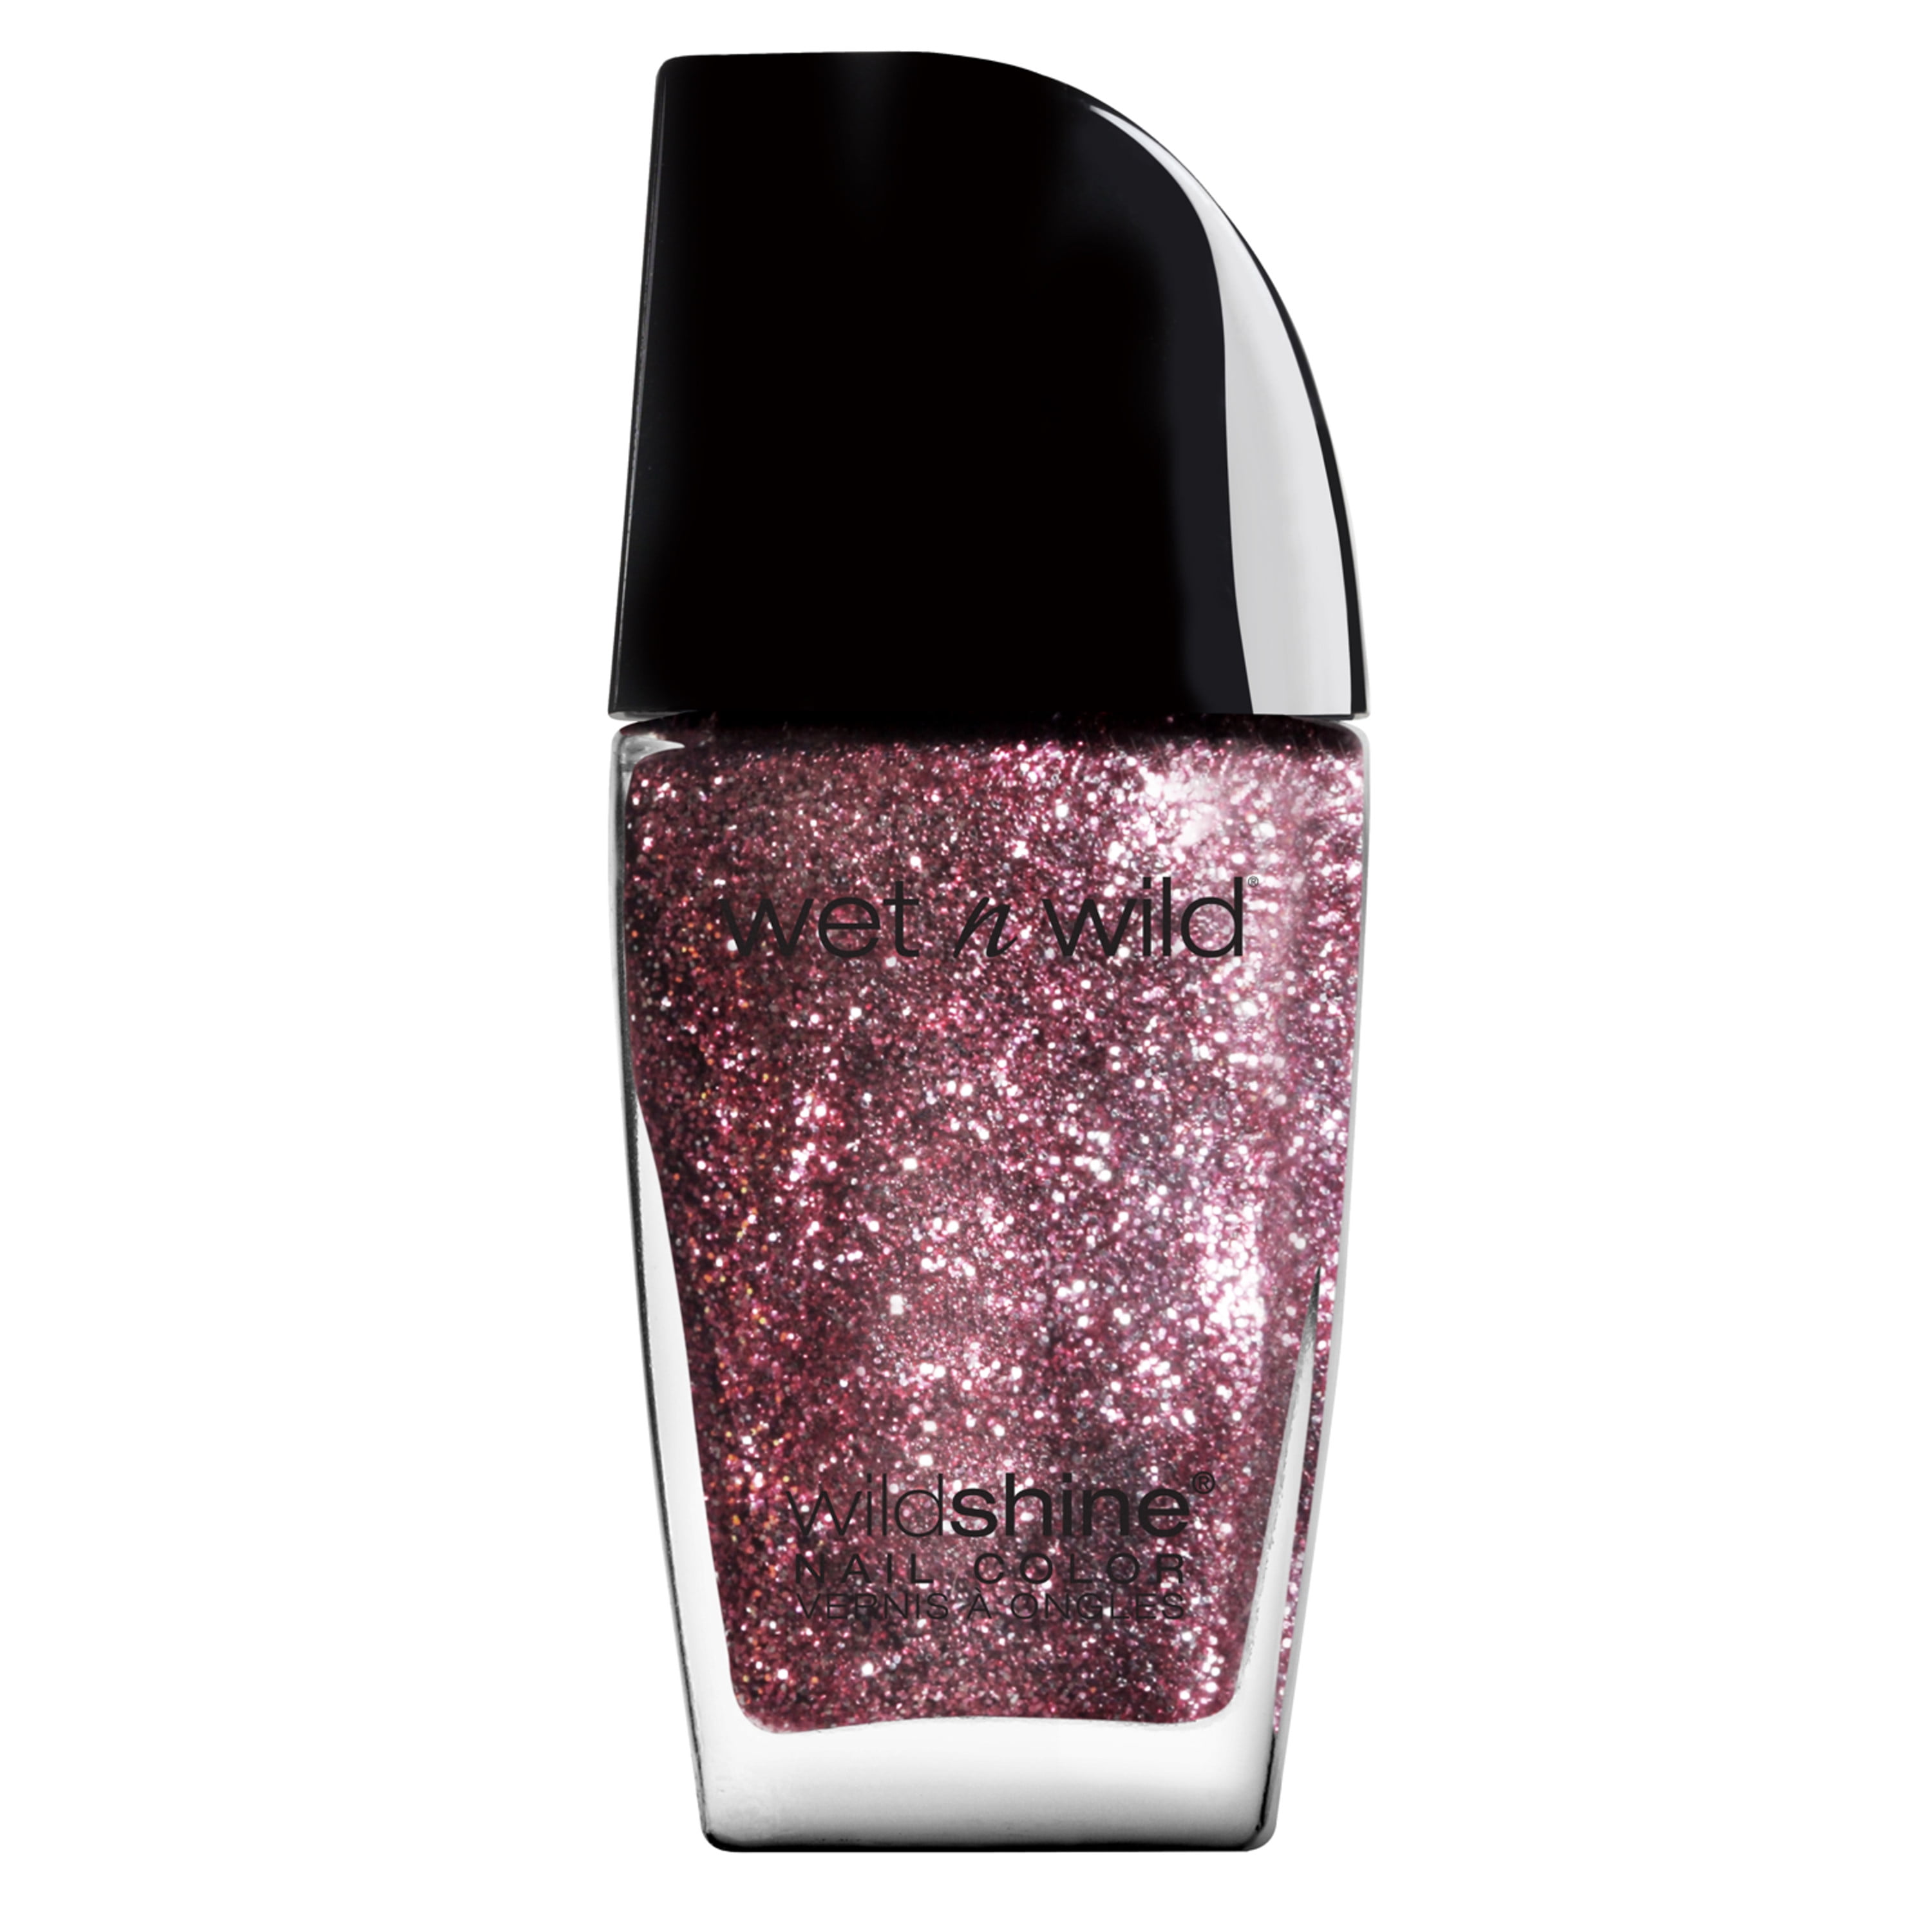 wet n Wild Shine Nail Color, Sparked - Walmart.com